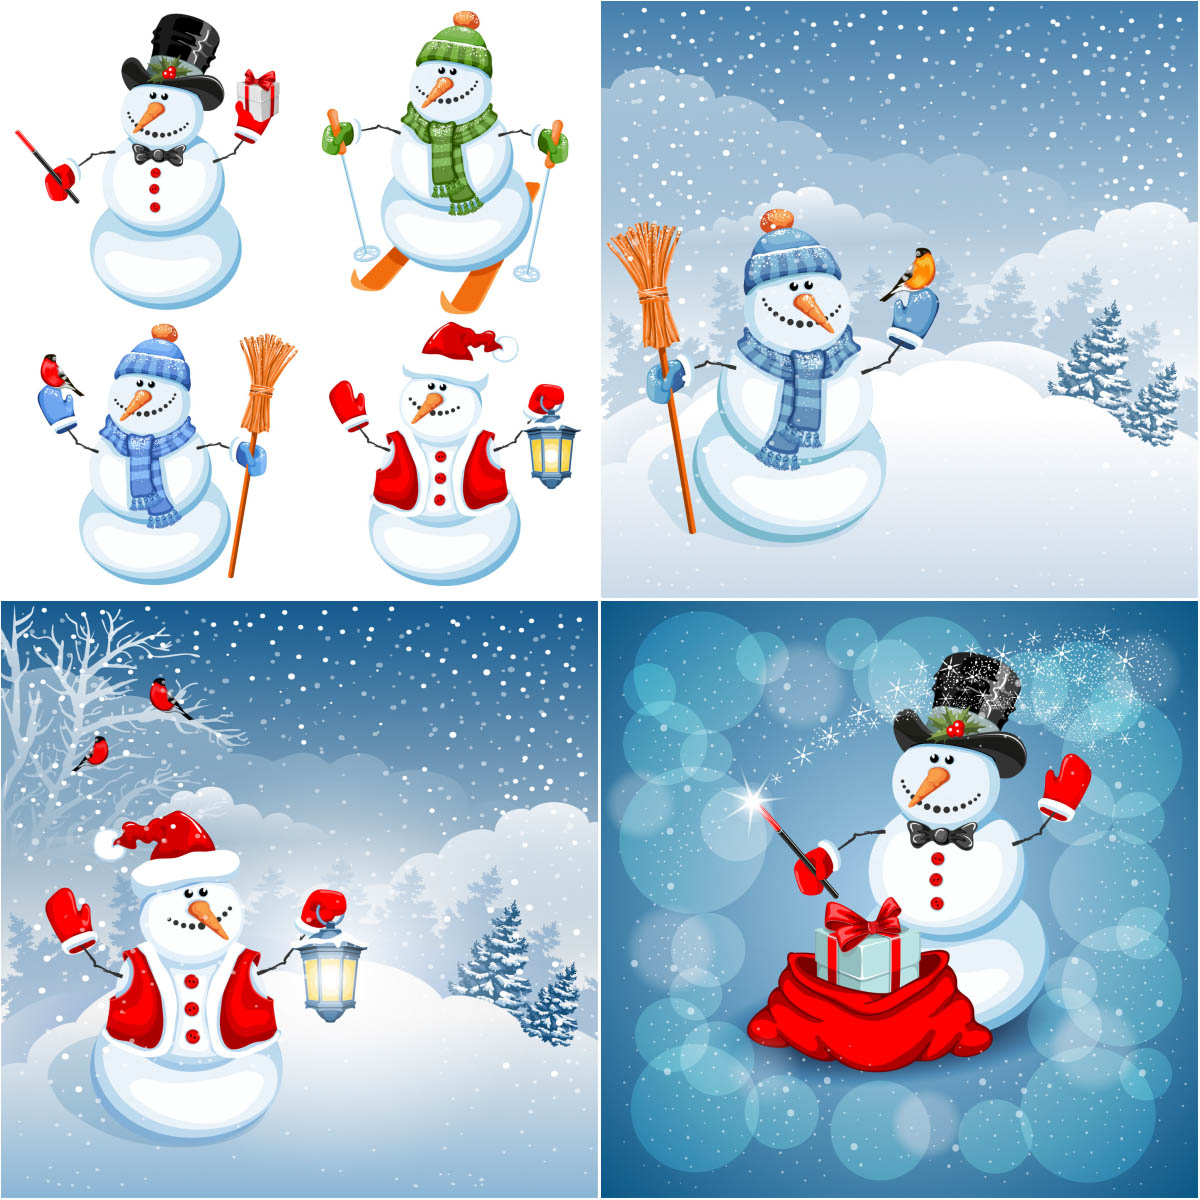 Backgrounds With Snowman Vector Free Download - Christmas Snowman Royalty Free - HD Wallpaper 